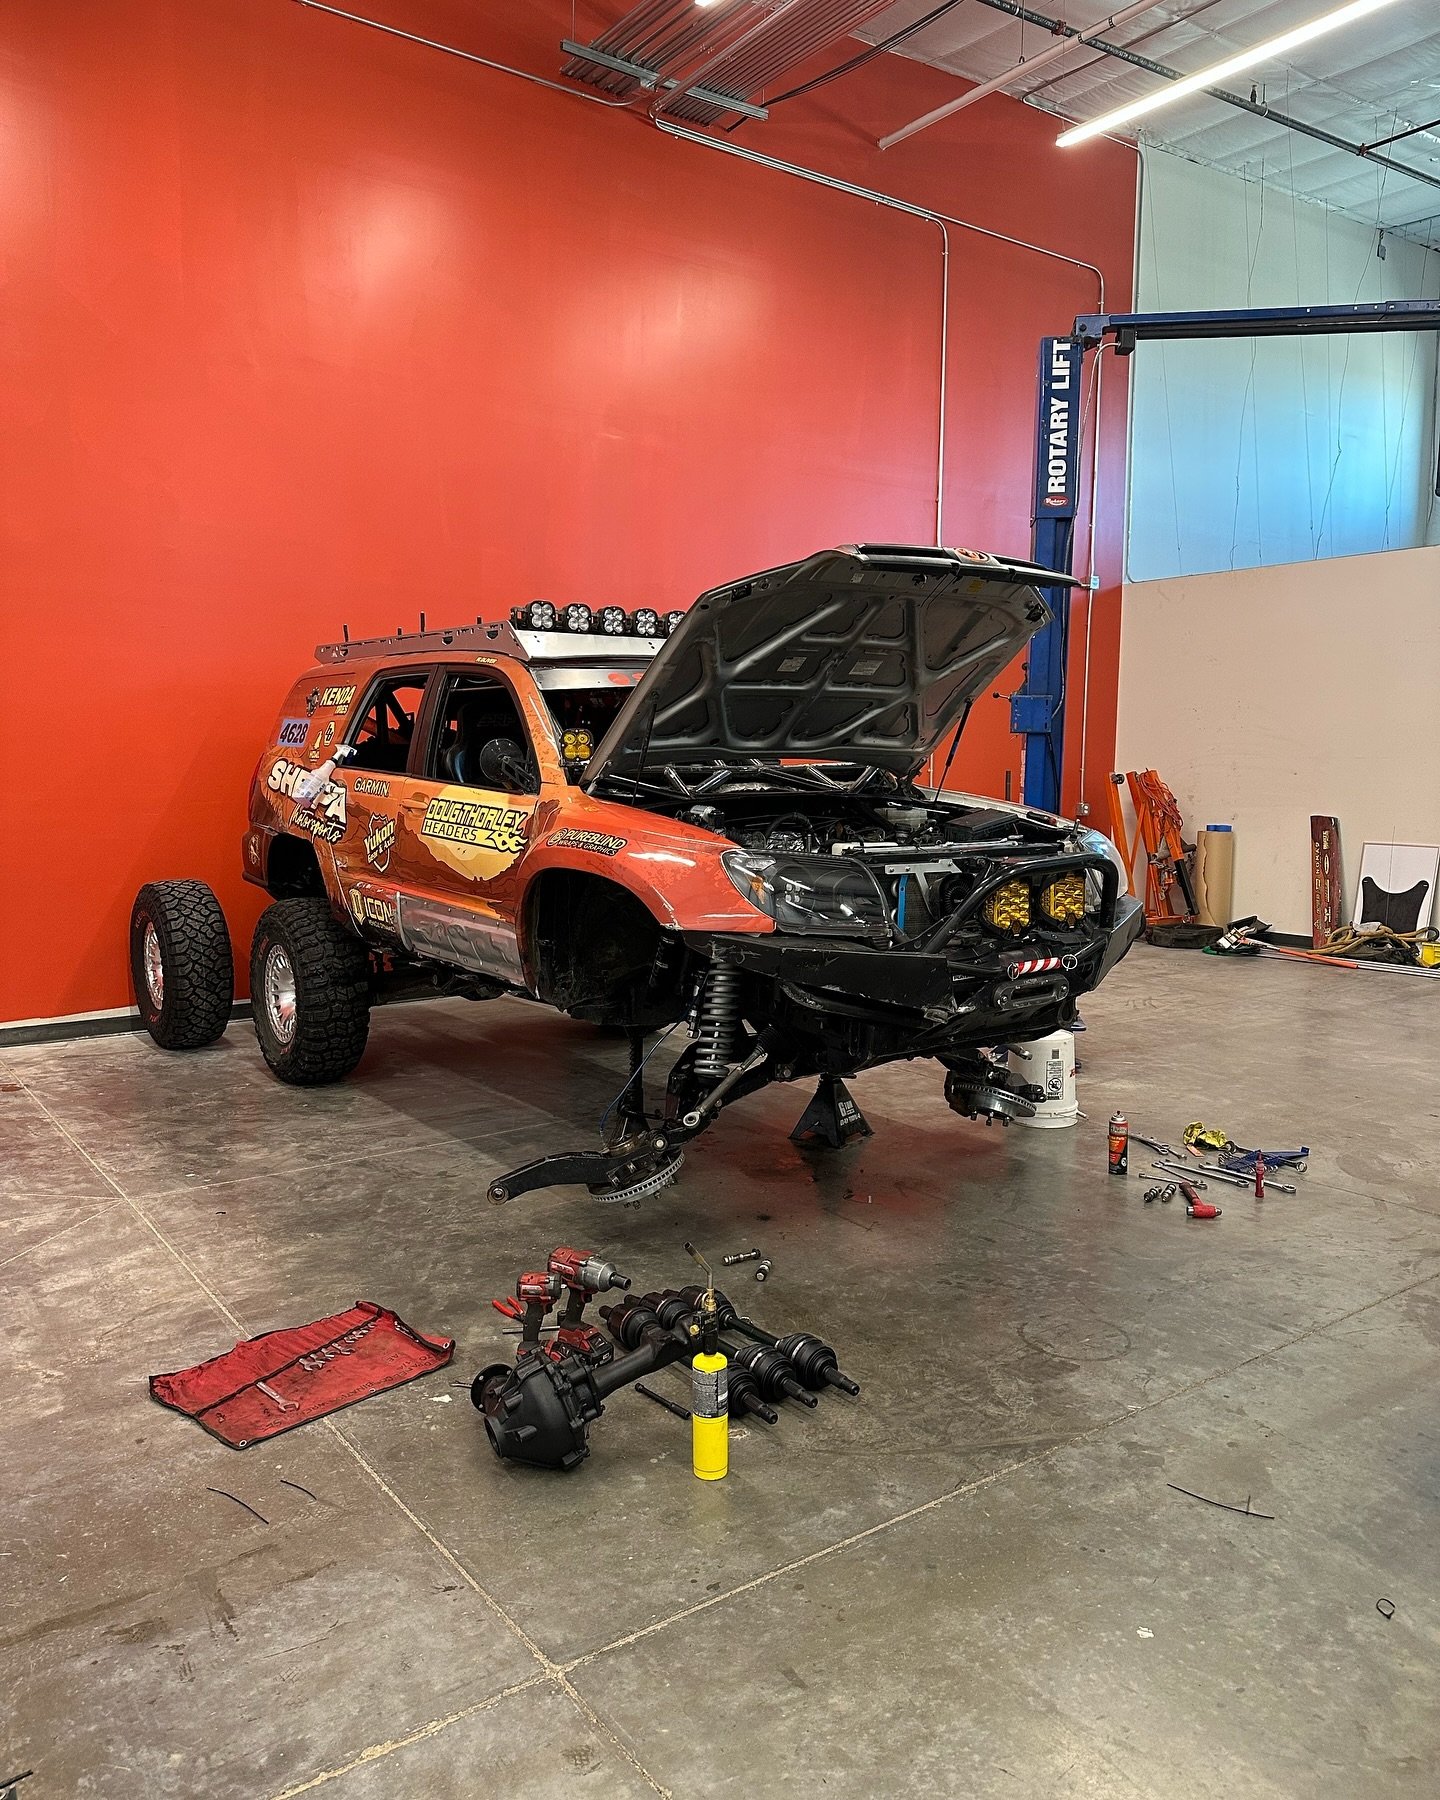 Hopefully the last time we prep this truck without a lift.

As you can see we got a two post&hellip; well most of one. We bought used and the arms we were given with the lift are wrong. So here we are prepping on jack stands once again. Soon. So soon